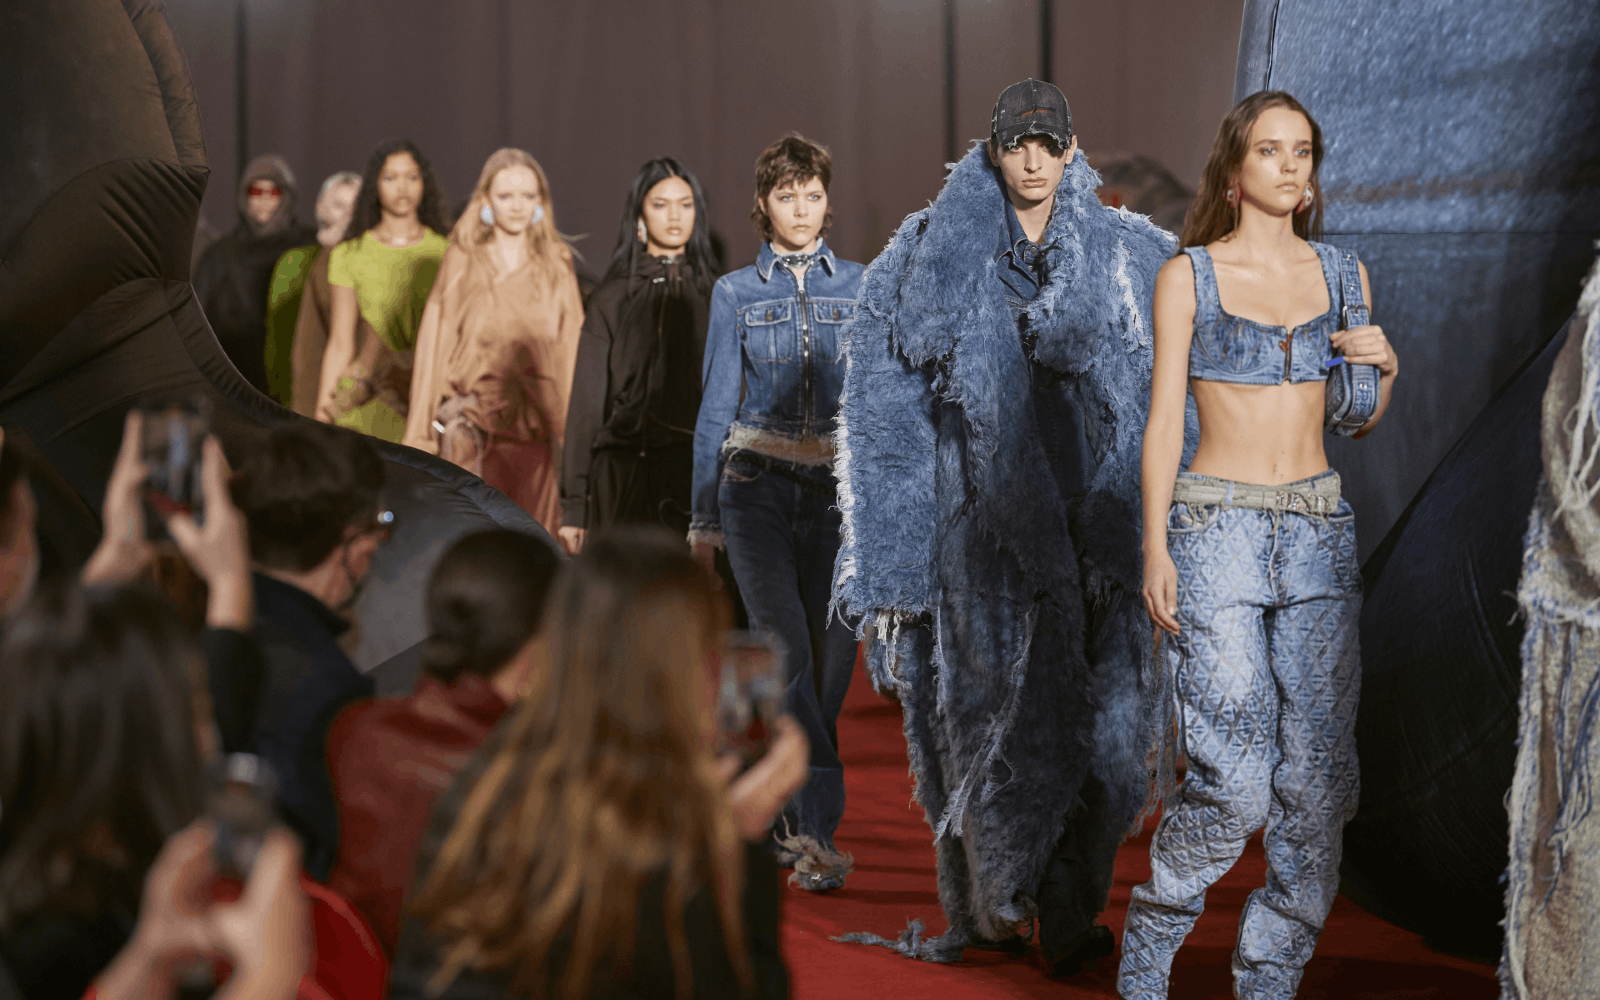 Highlight the events not to be missed in the fashion industry in 2023